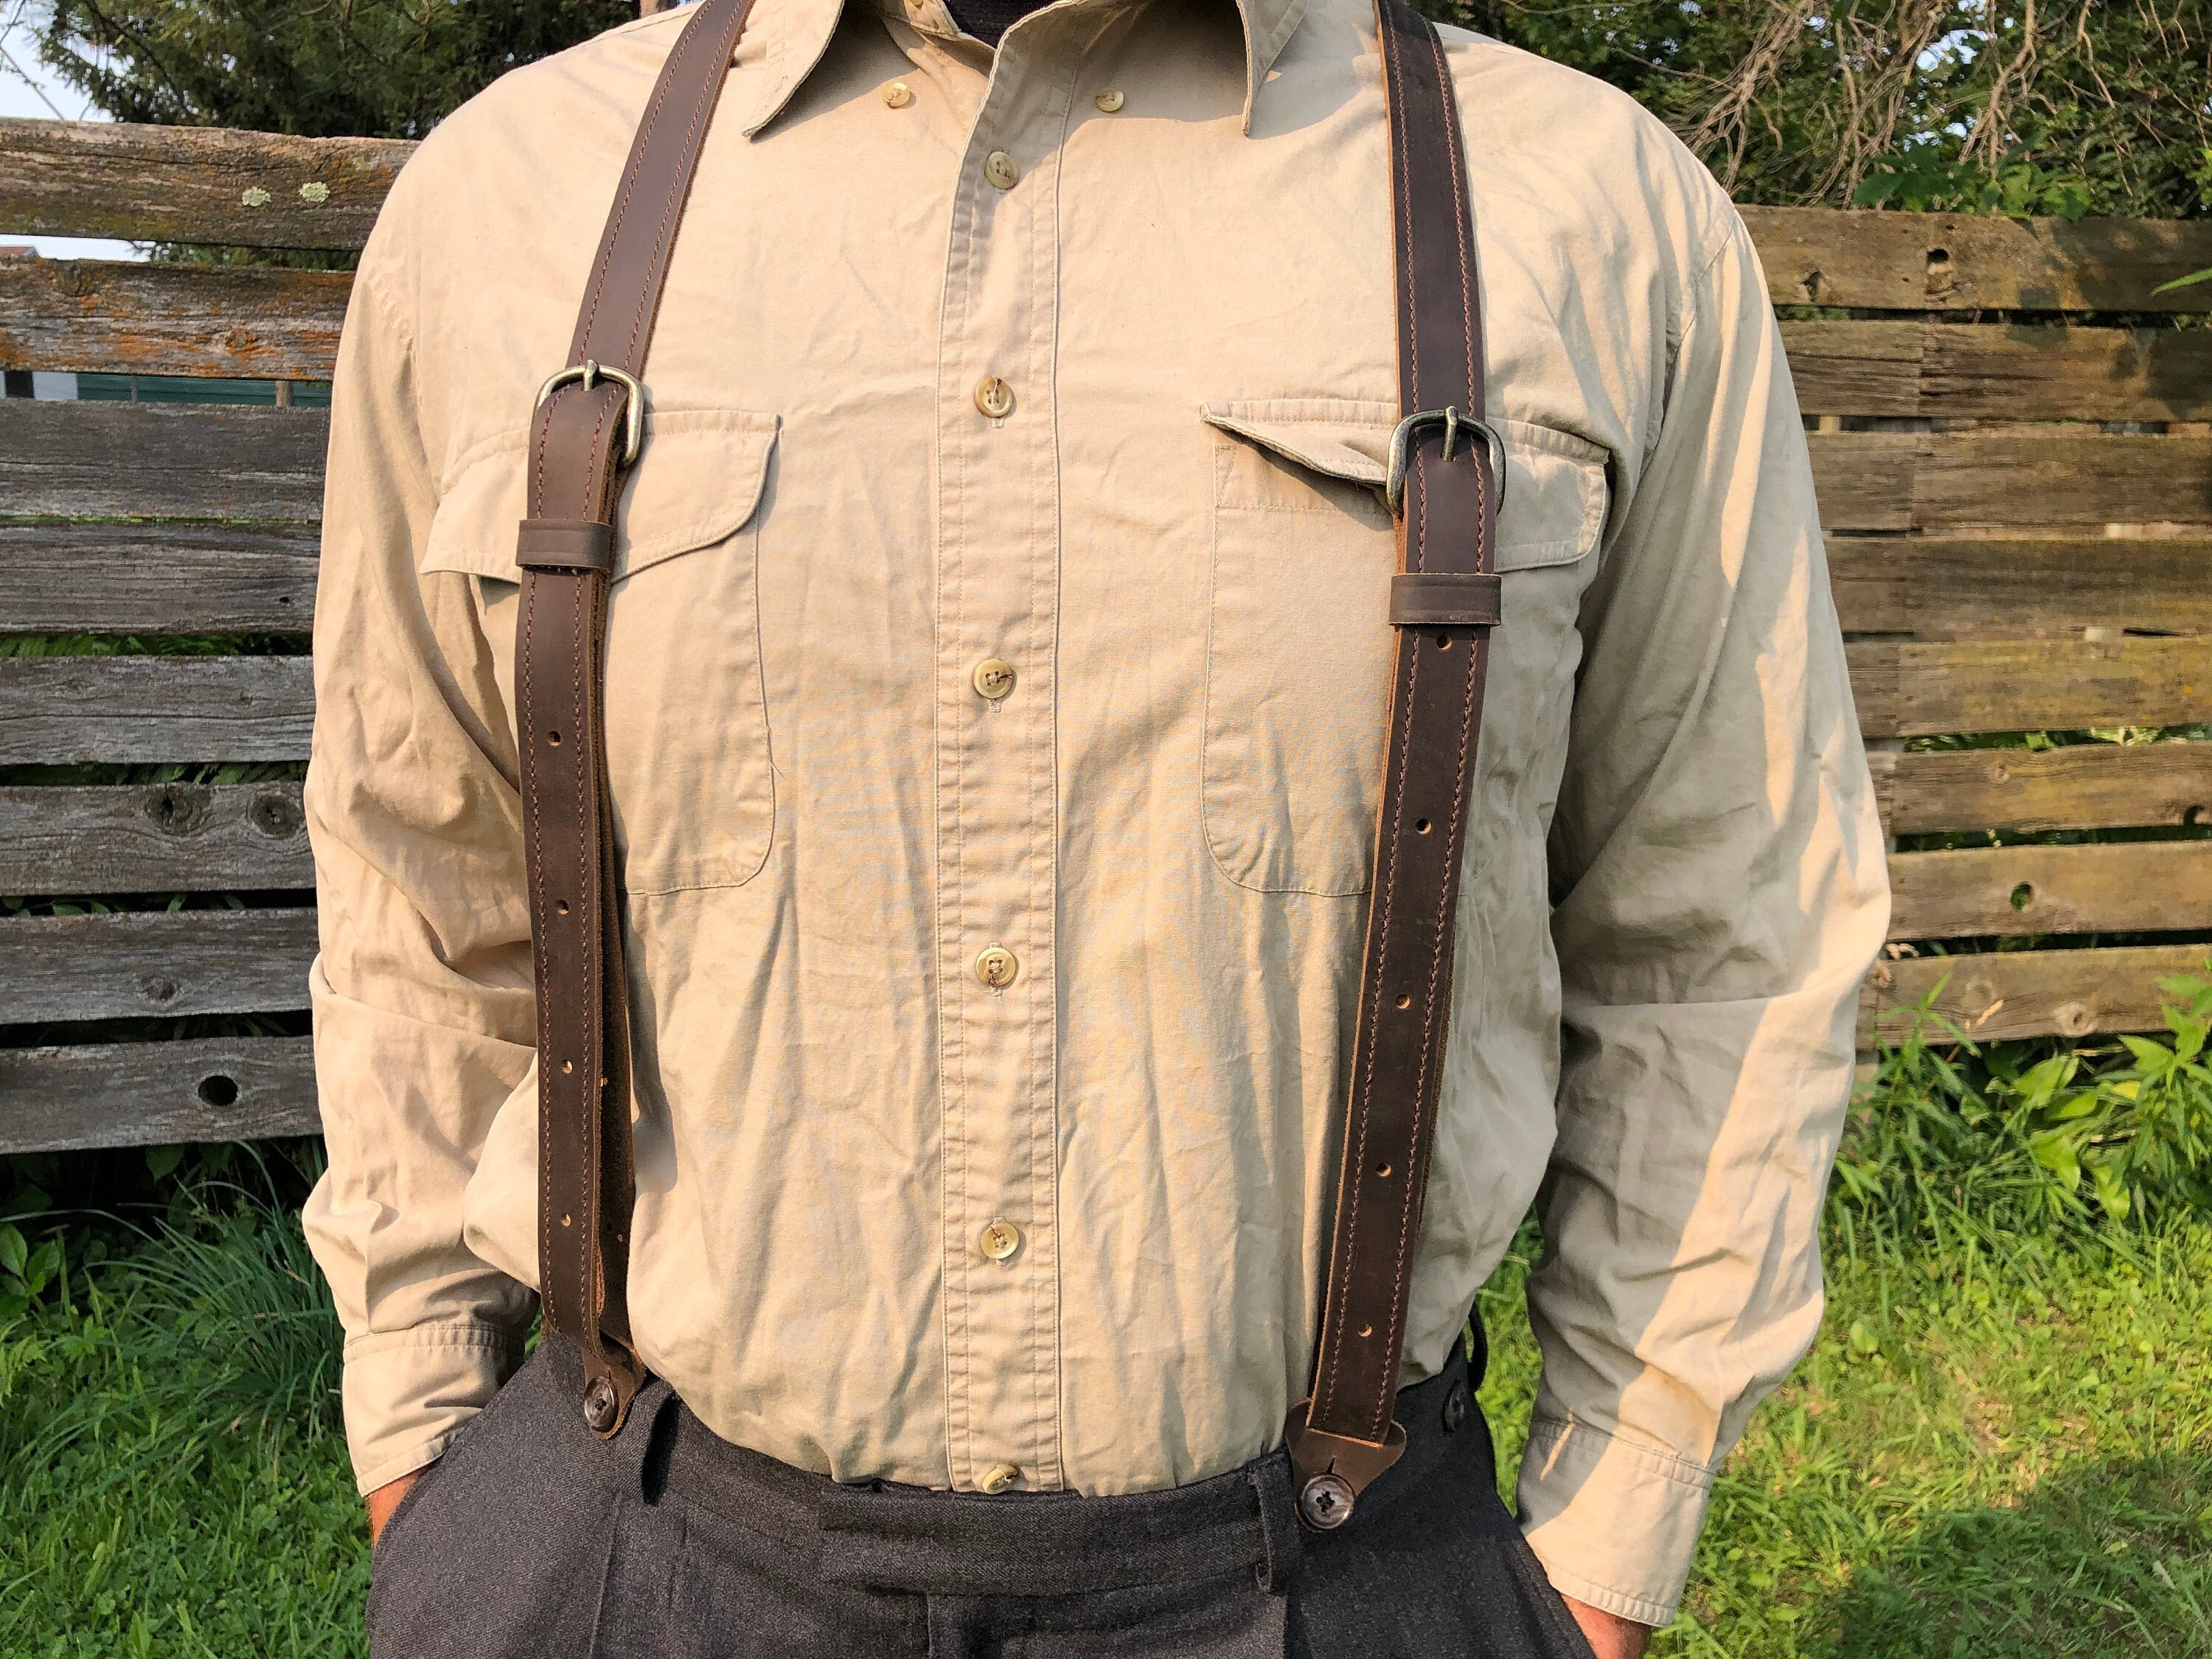 11 Amazing Button Suspenders For Men for 2023